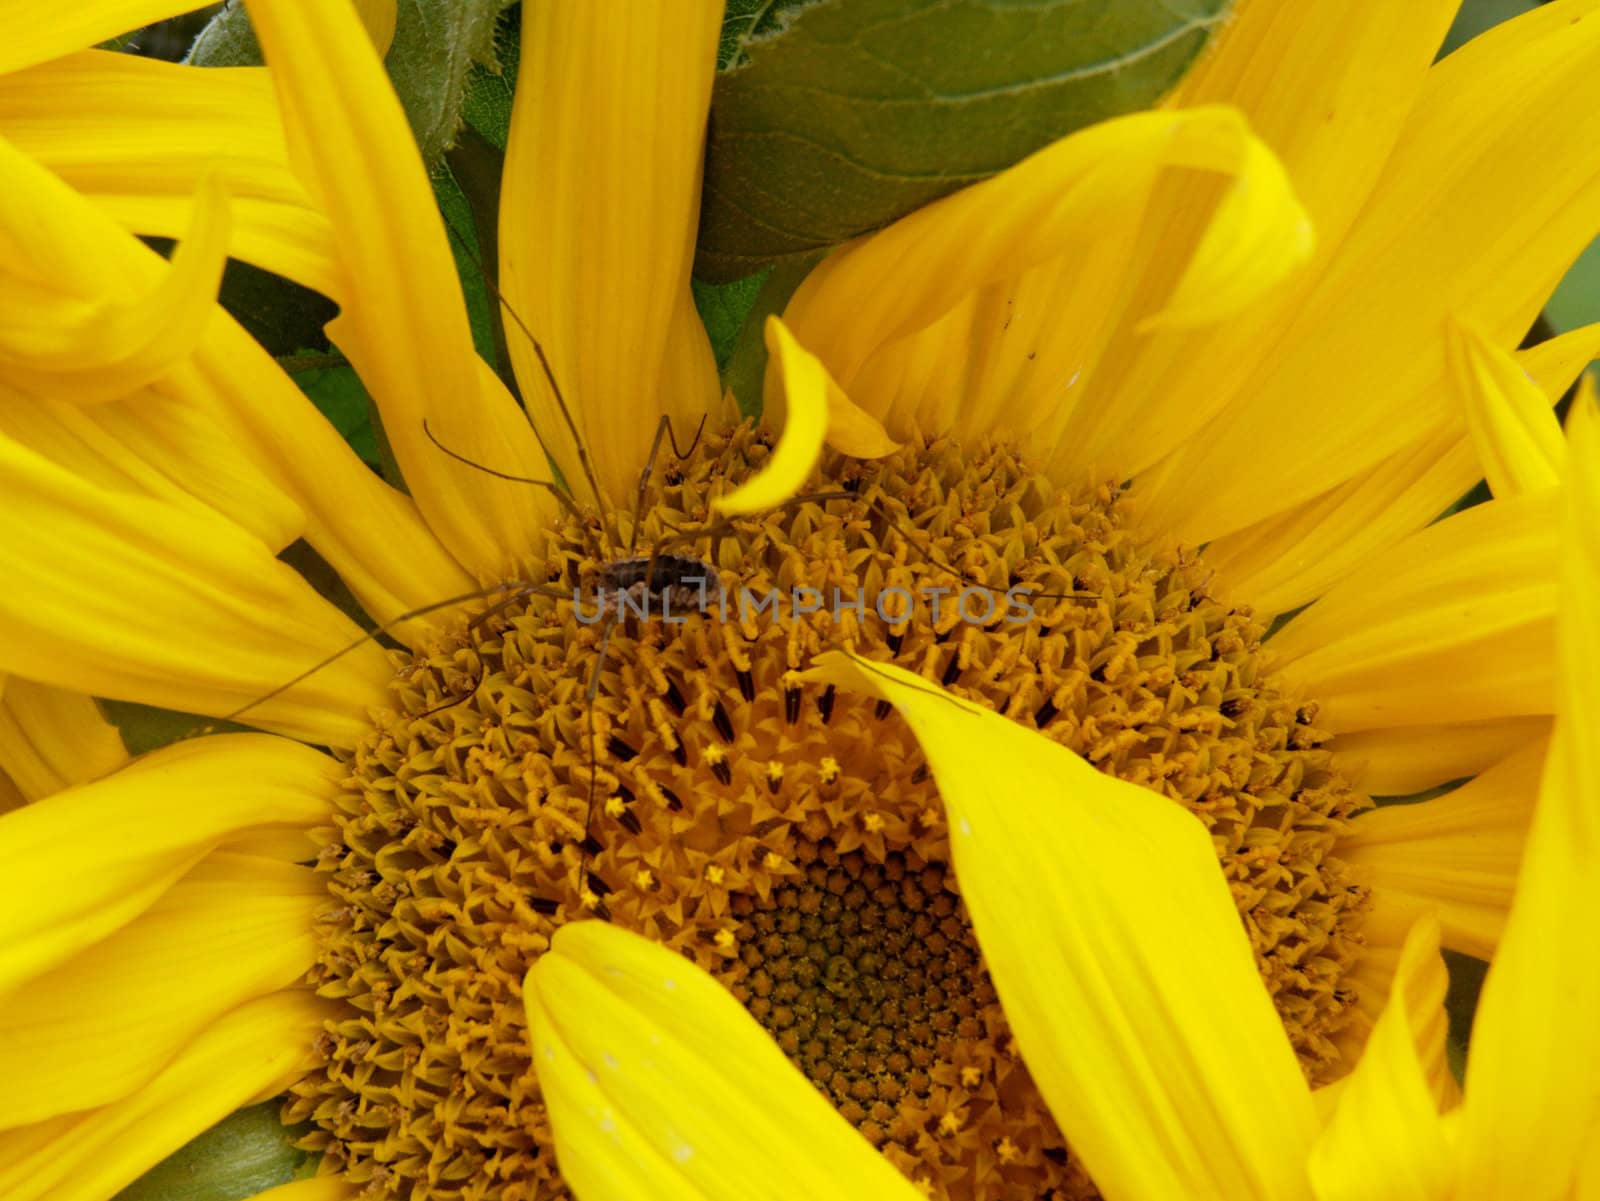 Spider on a sunflower by soloir